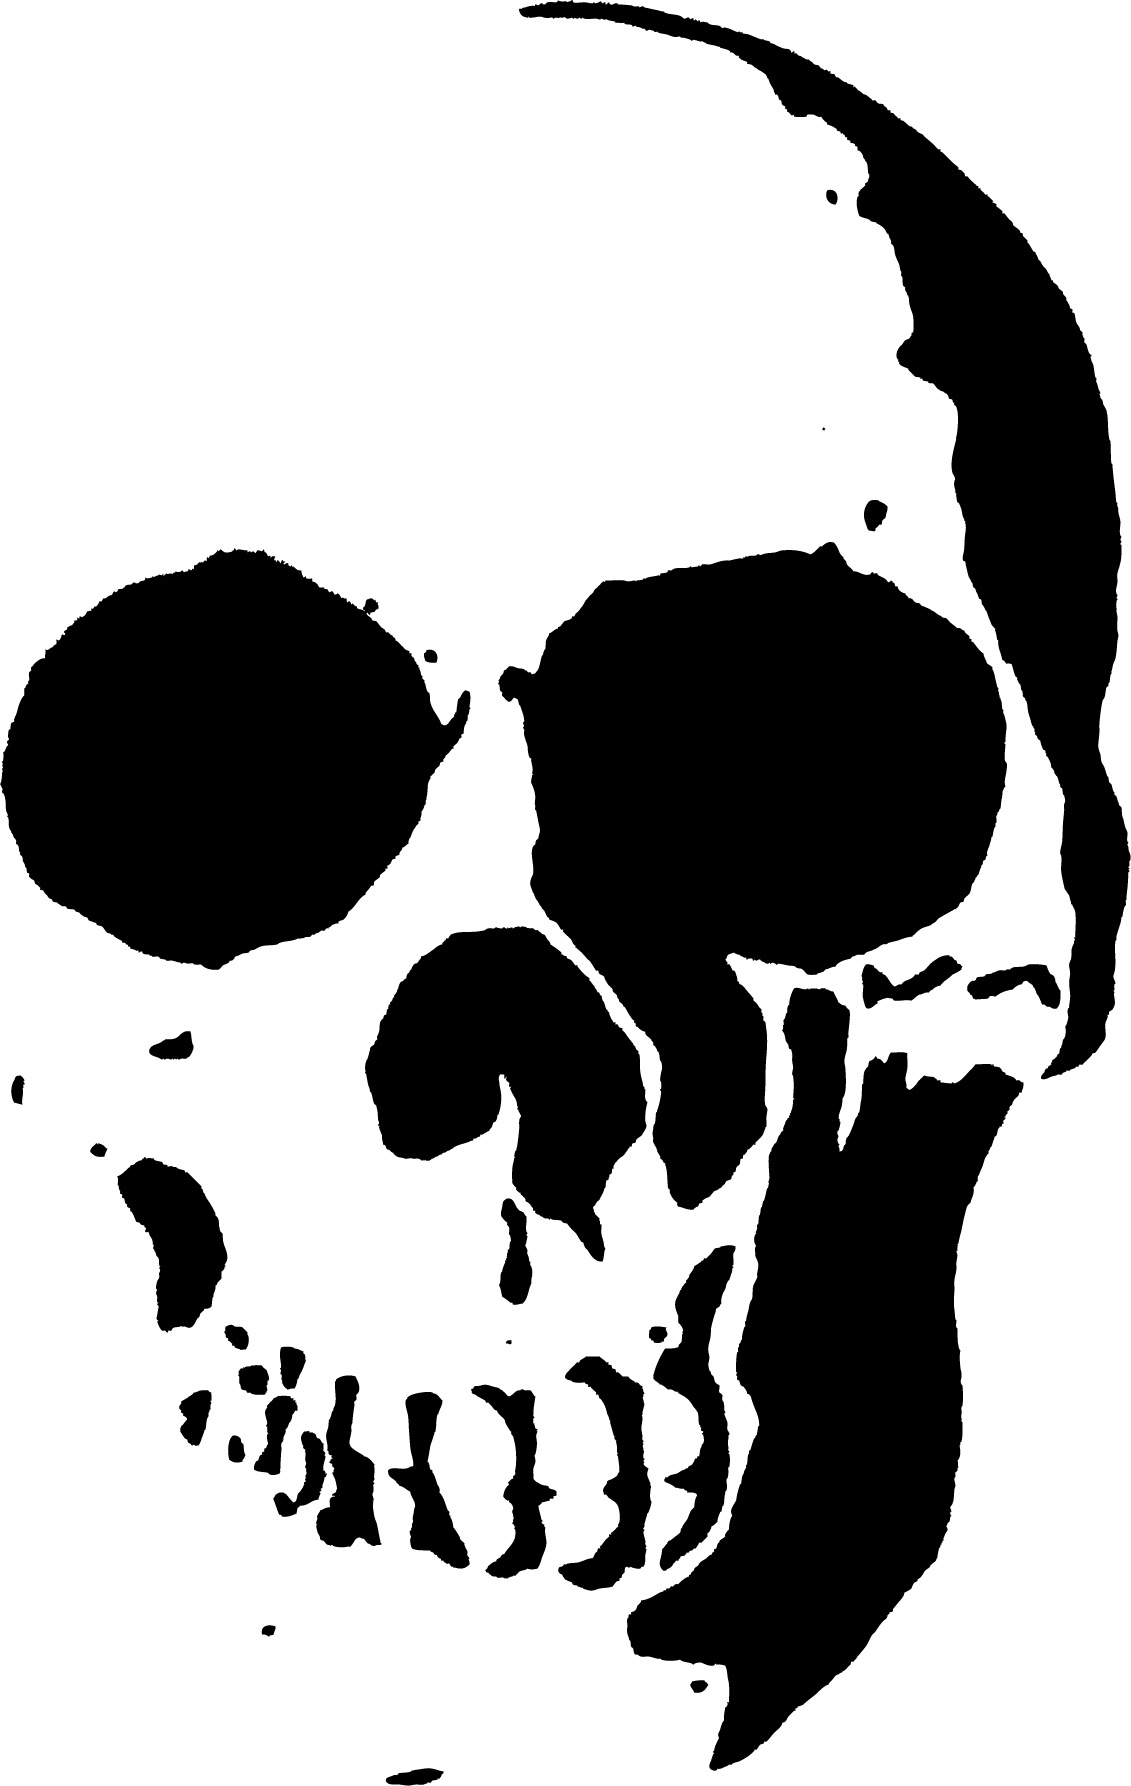 23 Free Skull Stencil Printable Templates | Guide Patterns - Free Printable Airbrush Stencils